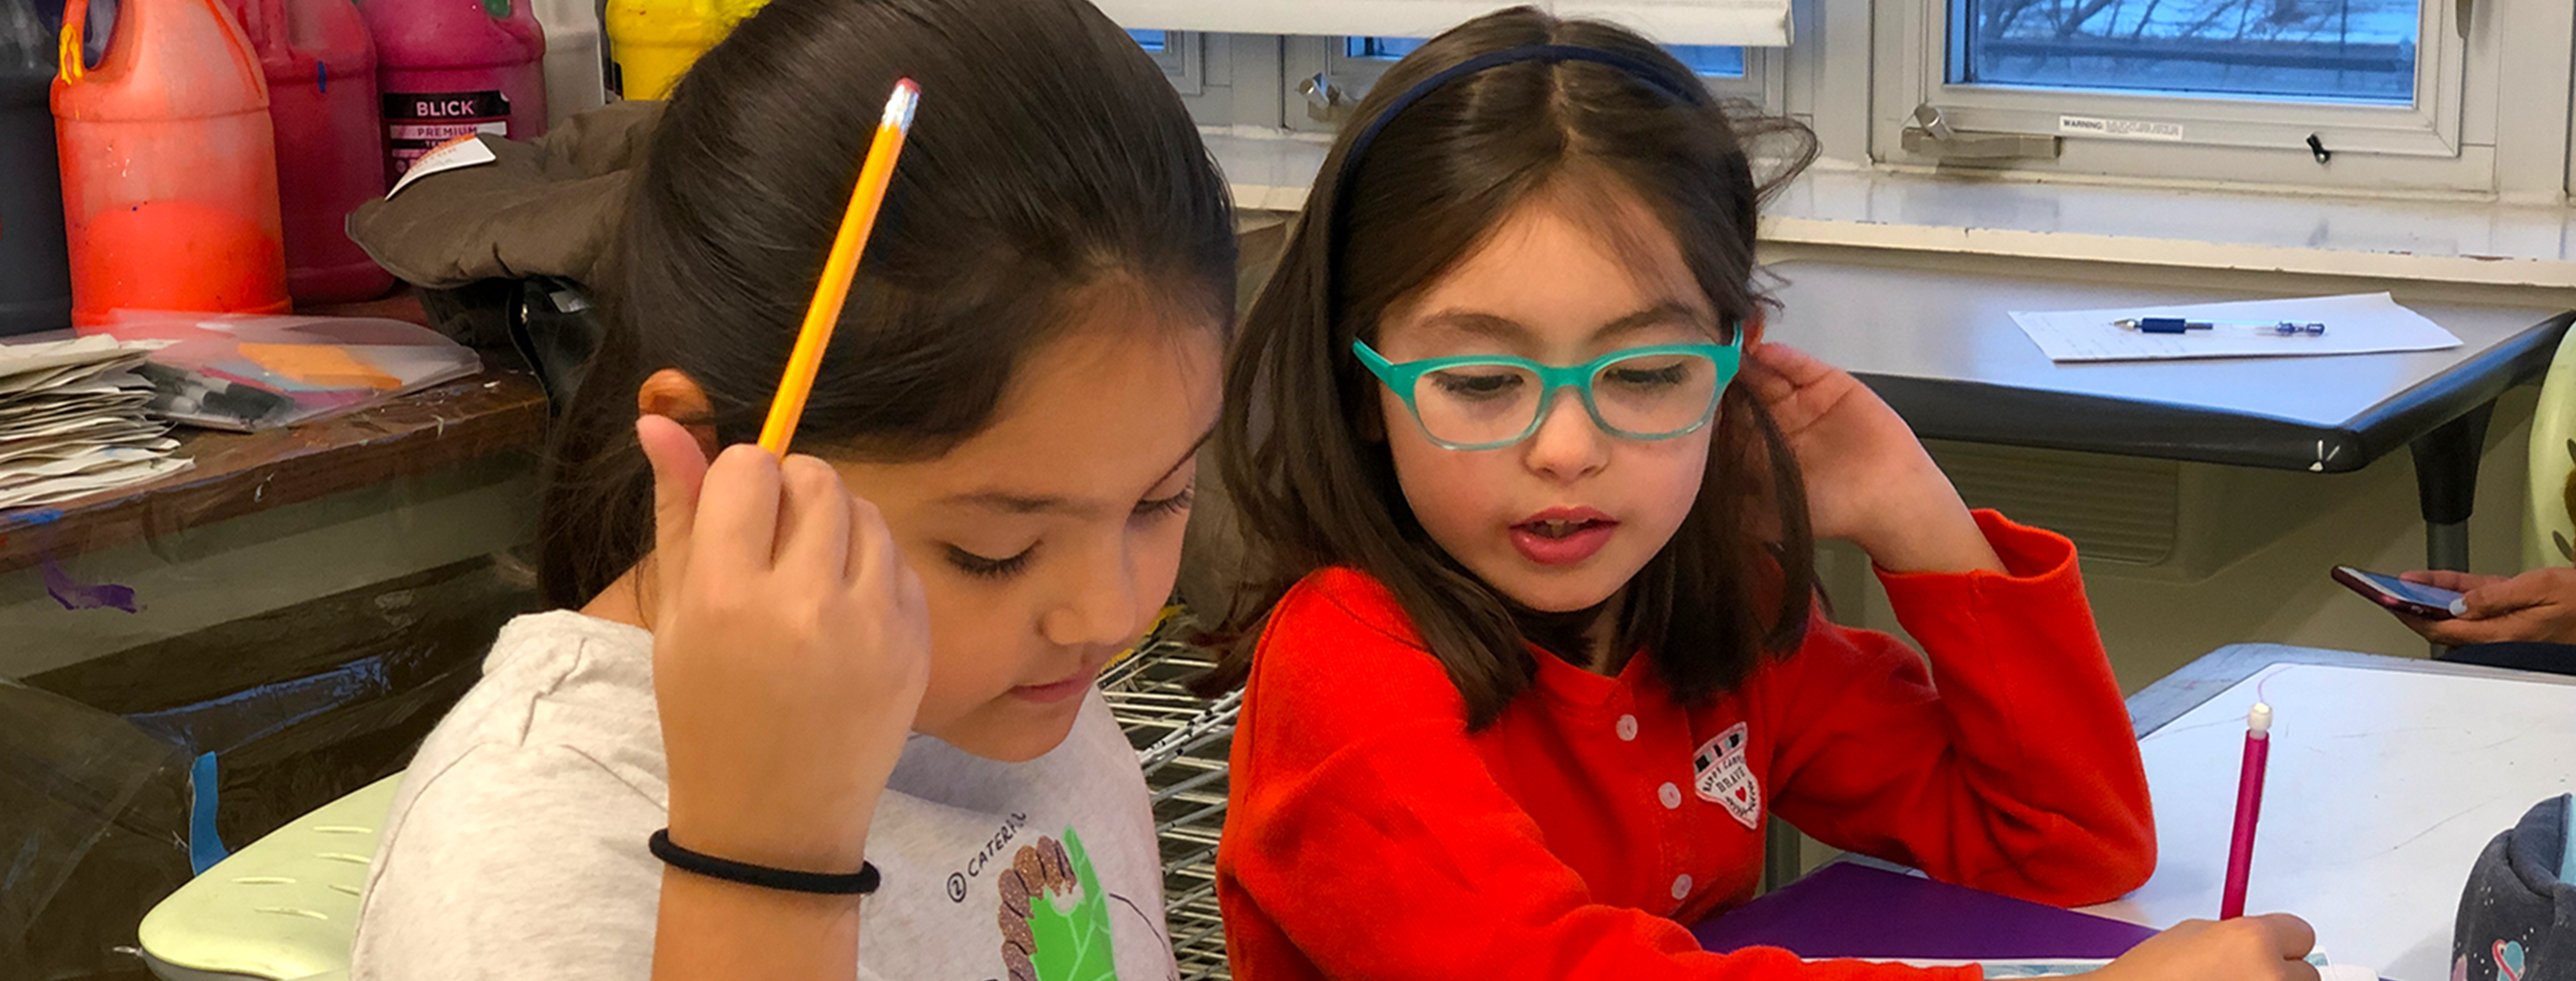 two elementary school-aged girls sitting next to each other at a table, looking down at one's work. the one on the left holds a yellow pencil and wears a gray t-shirt; her hair is in a ponytail. on the right the girl wears a bright red shirt and turquoise-framed glasses. her hair is straight and brown, down with a thin black headband.